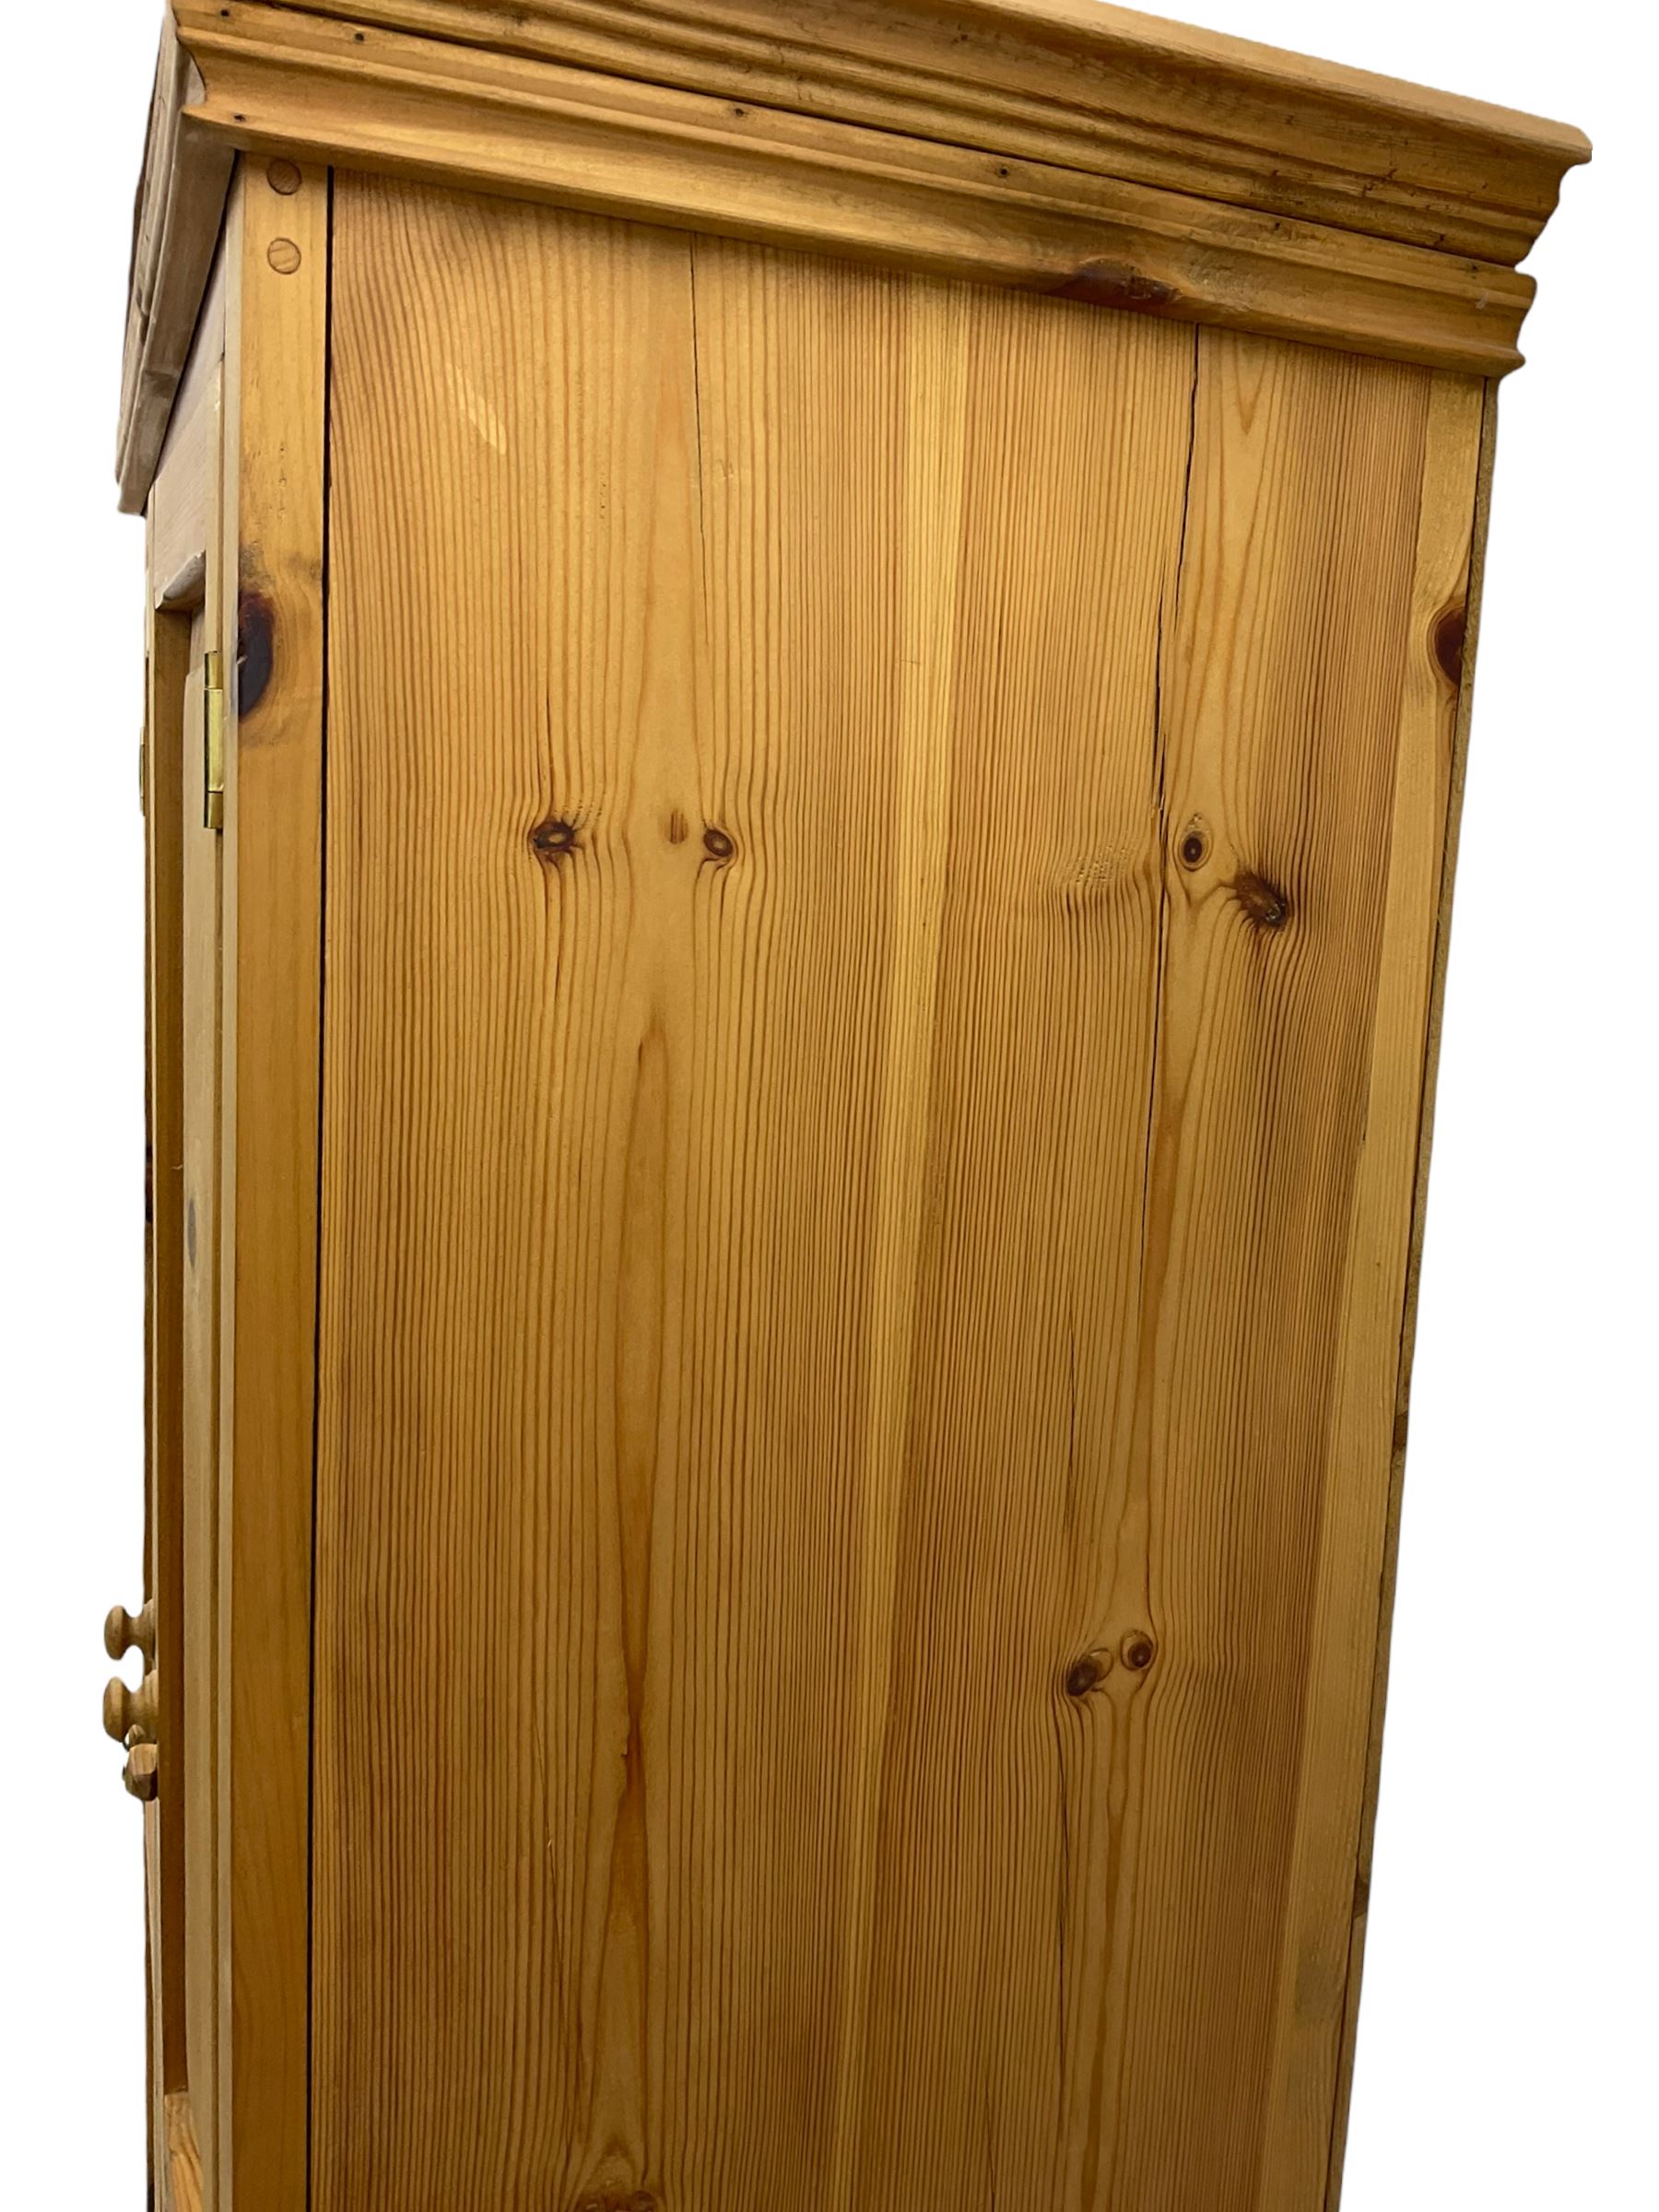 Solid pine double wardrobe - Image 5 of 8